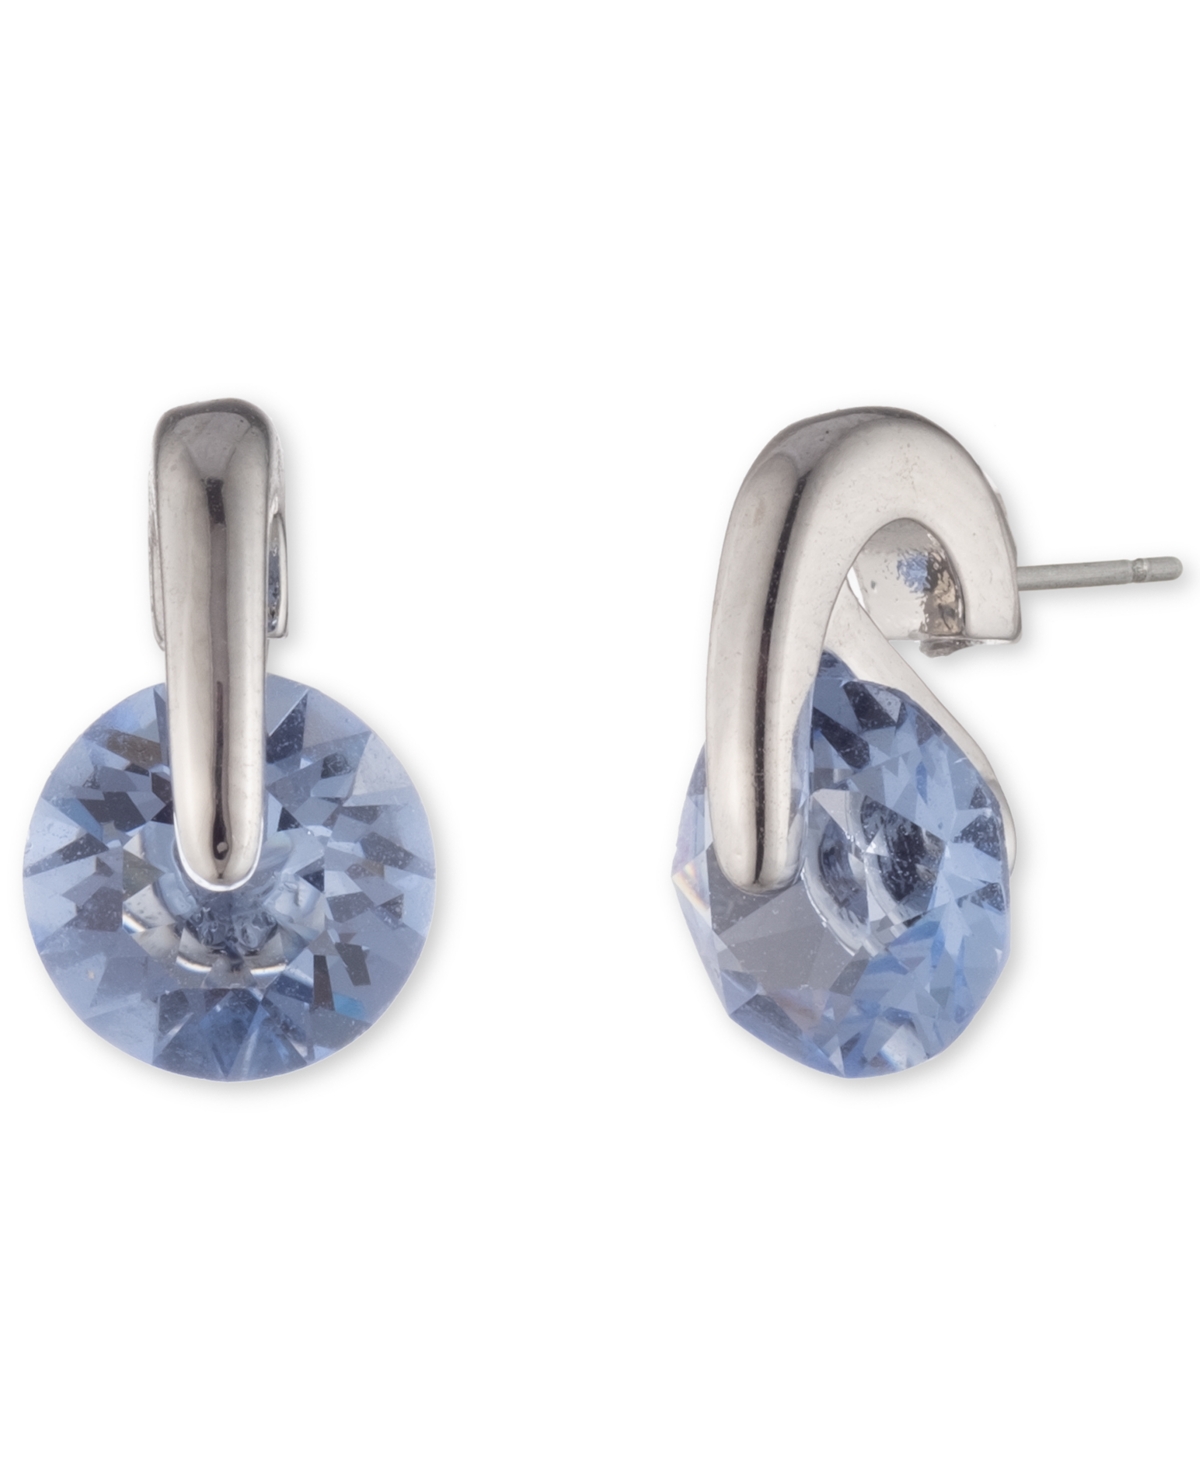 Givenchy Earrings, Crystal Accent In Blue